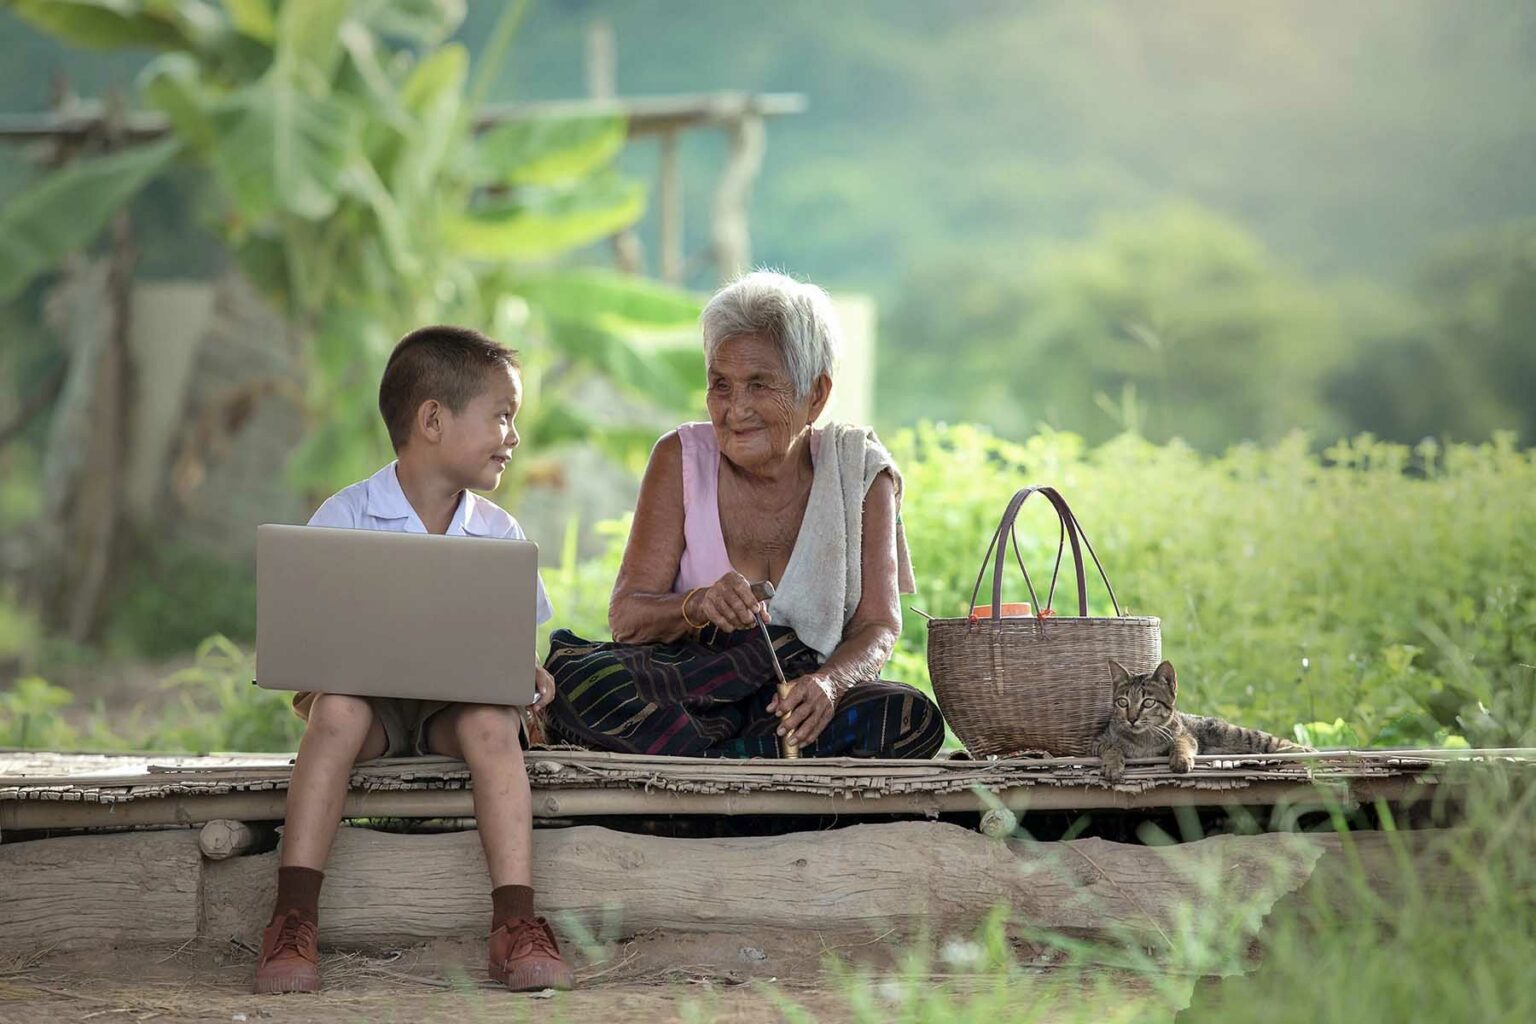 A boy sits next to his grandparent outside, with lots of greenery around, while holding a laptop.